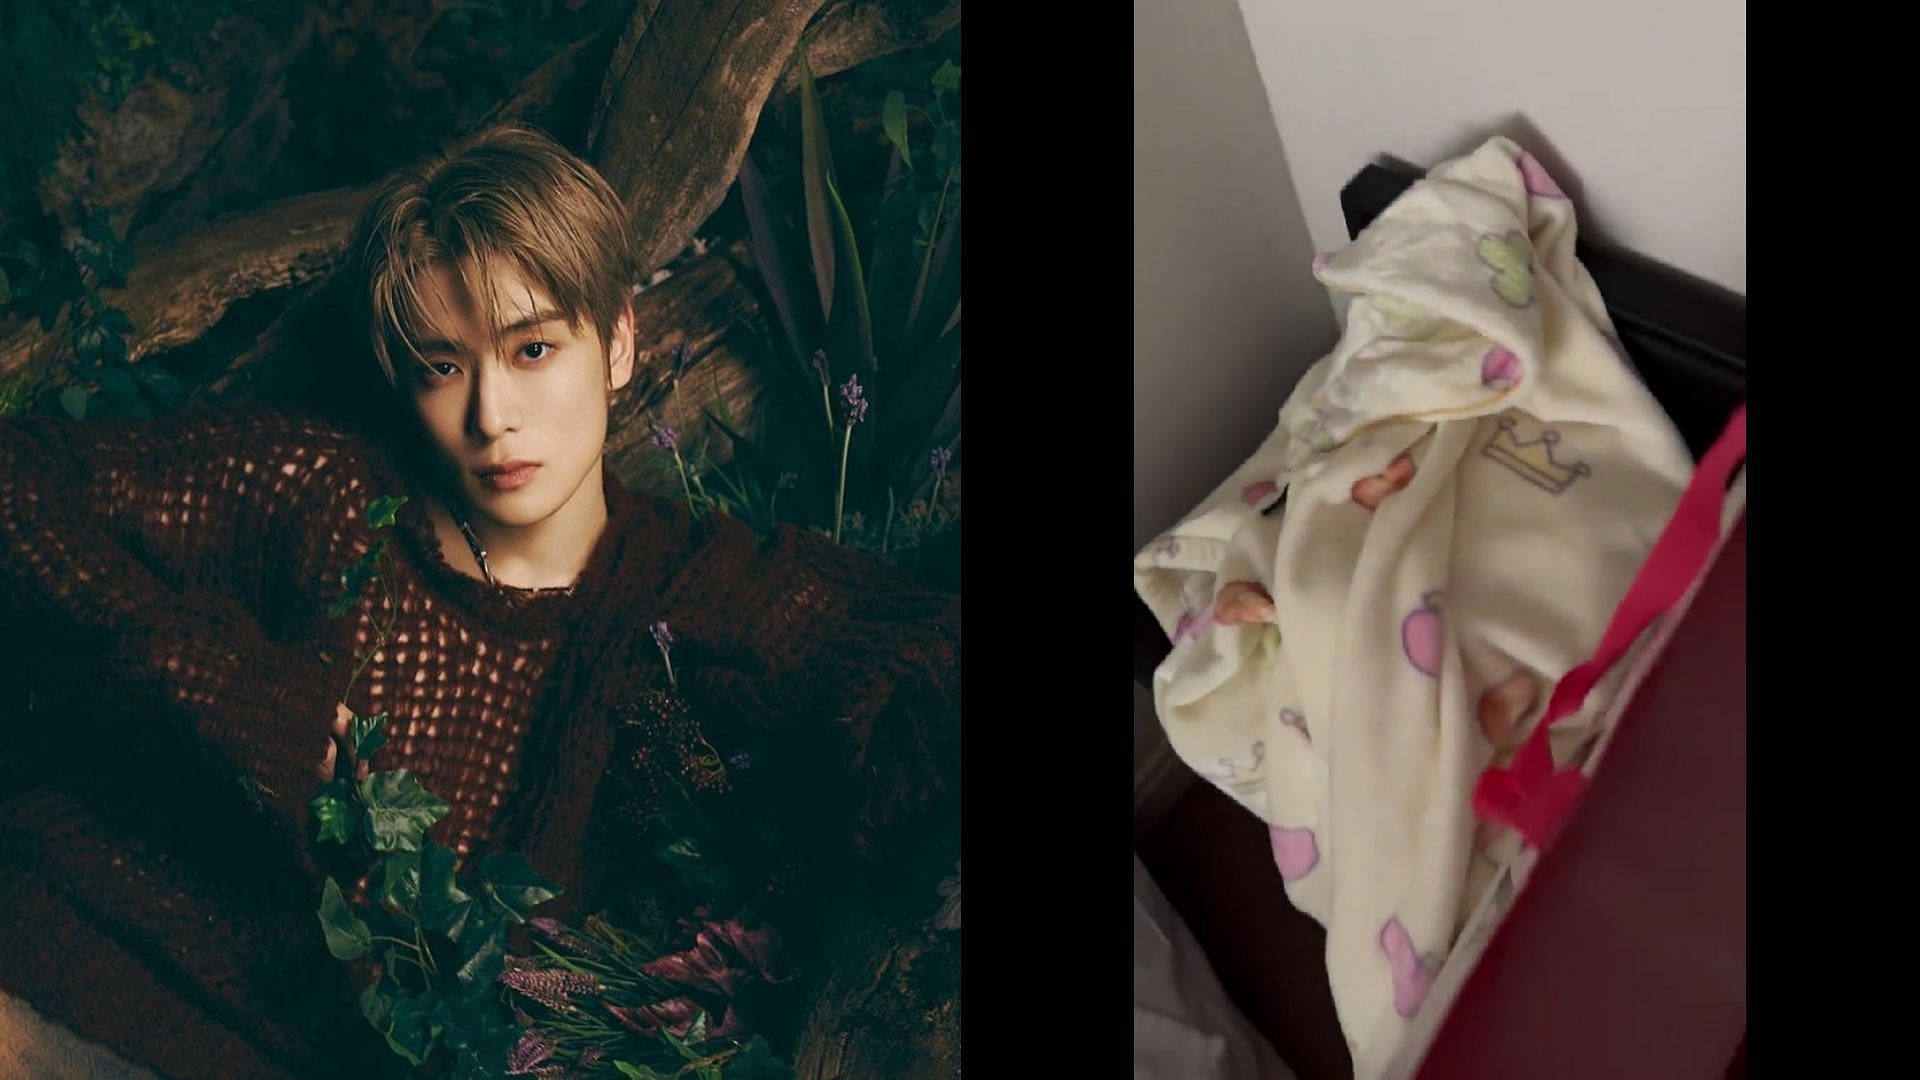 “You need to be IN JAIL”: Sasaeng allegedly breaks into NCT Jaehyun’s hotel room, fandom in an uproar